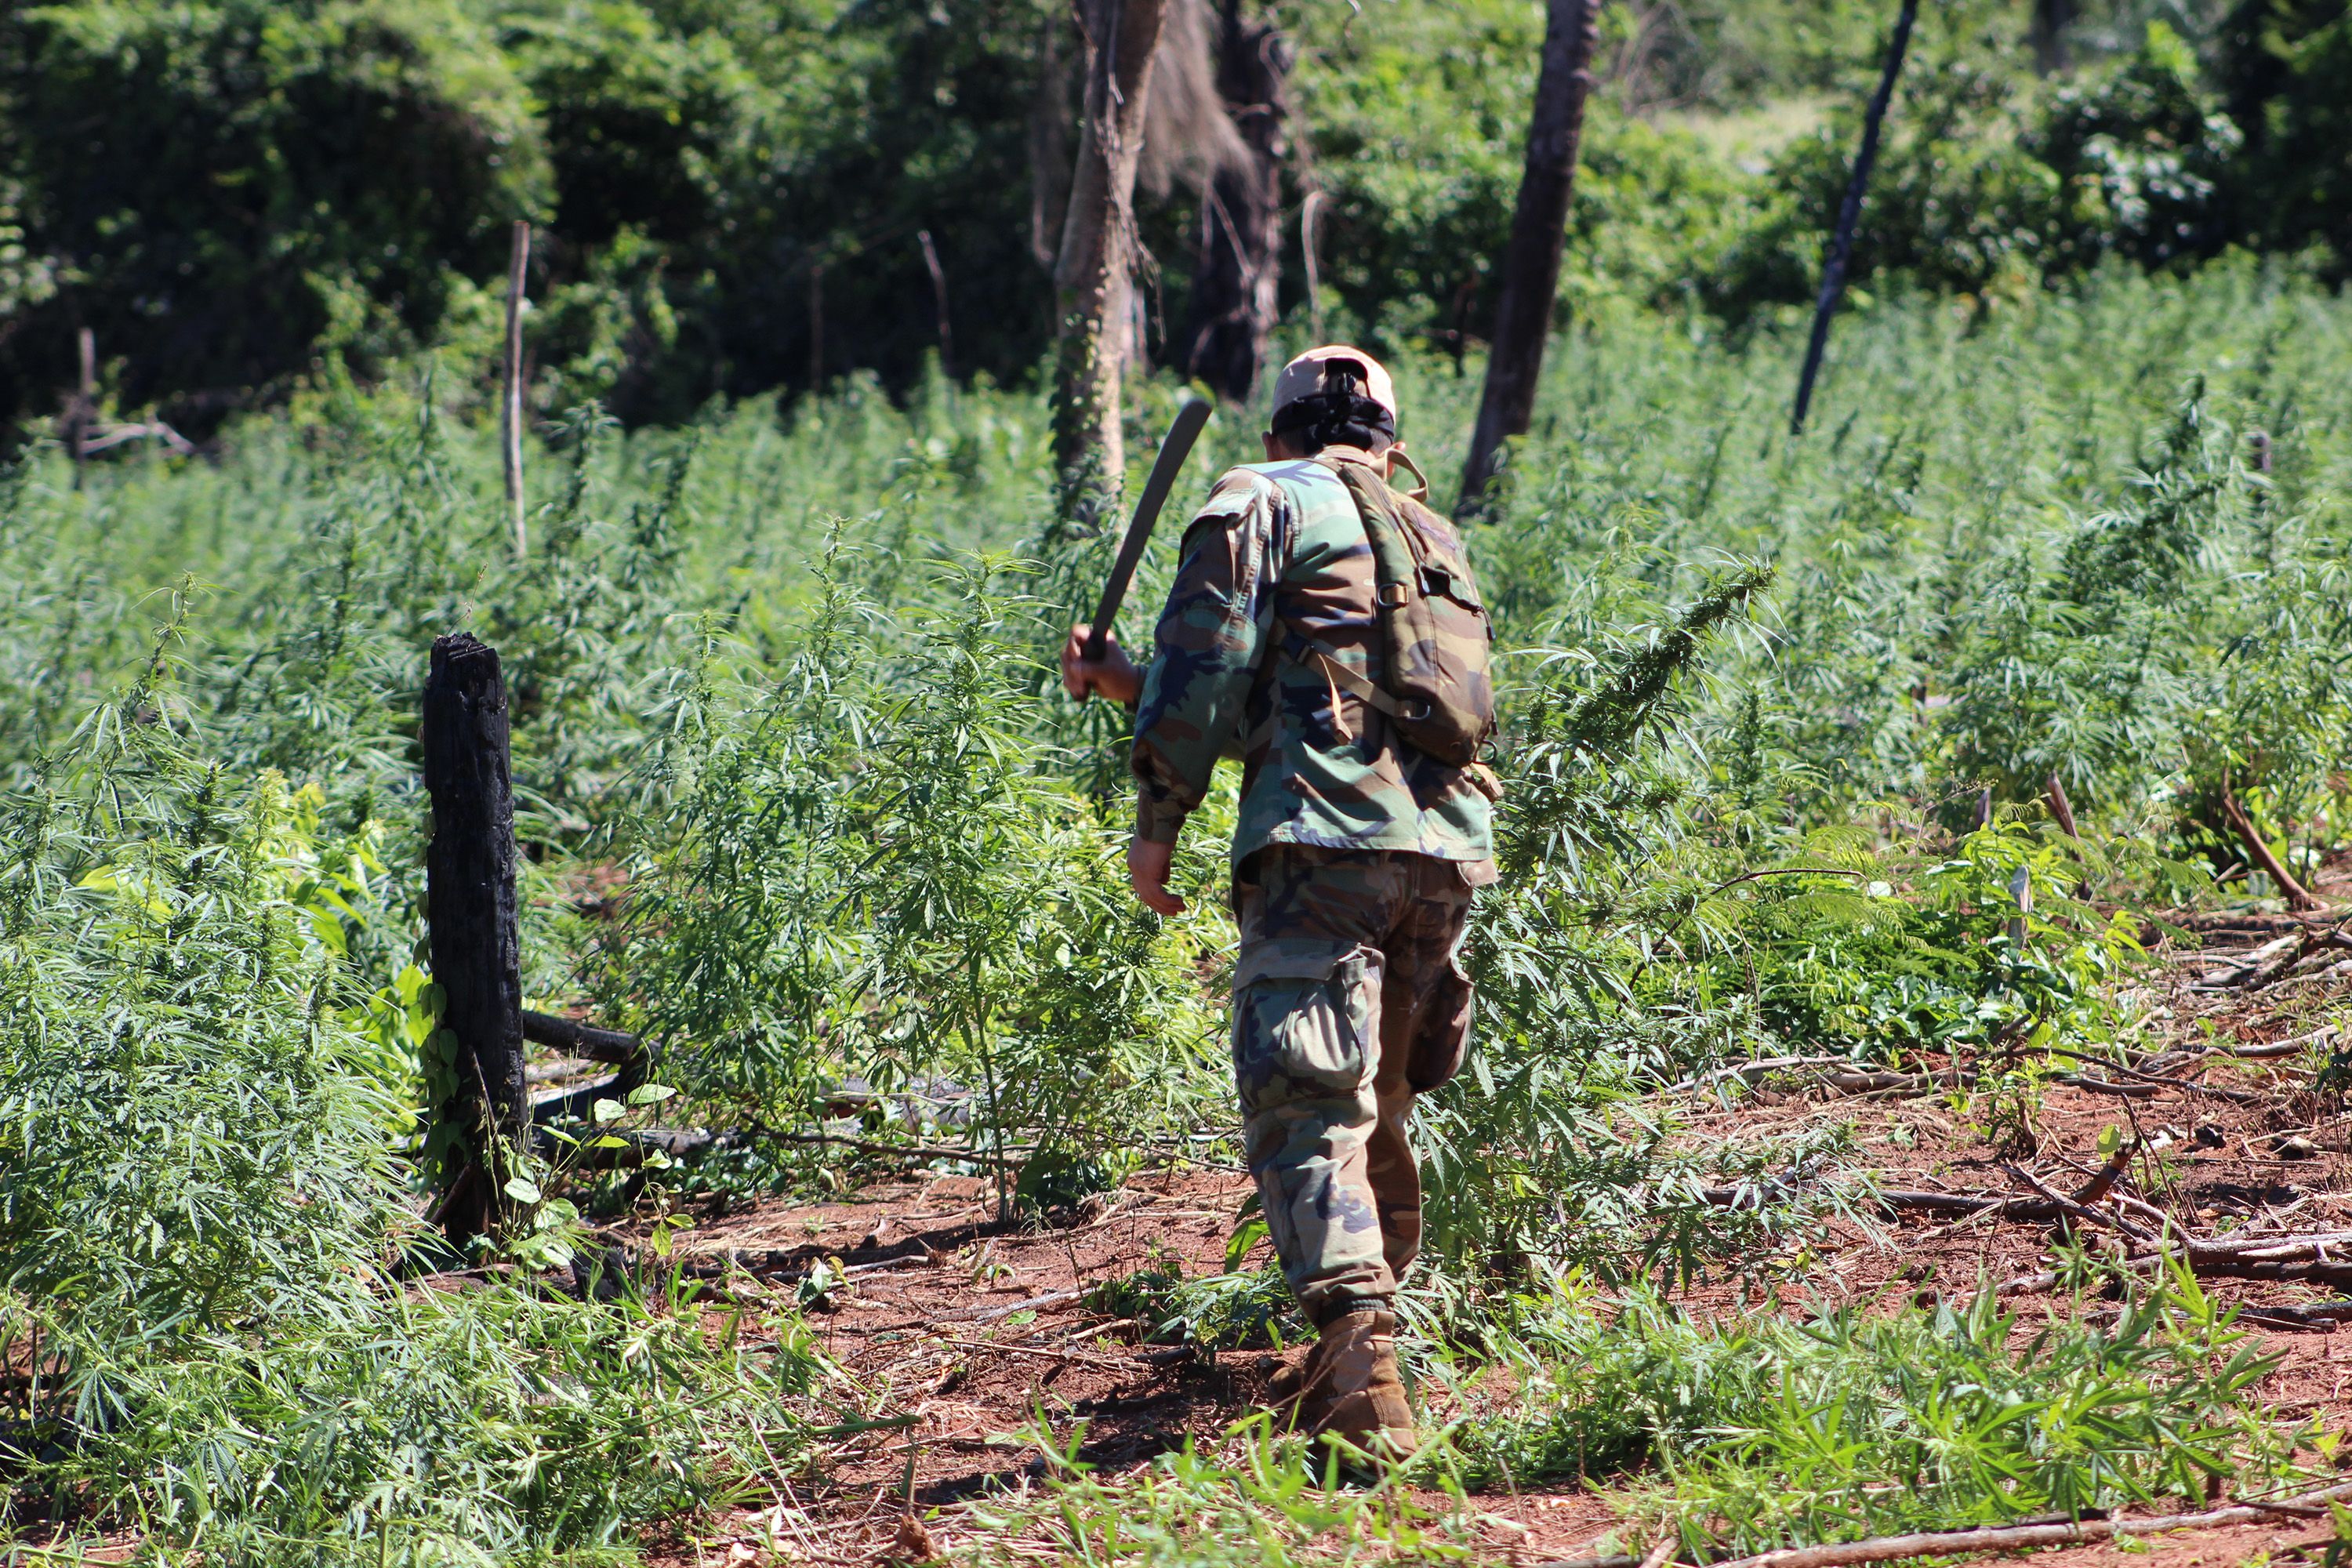 SENAD special forces don’t mess about. All plants are swiftly chopped down with a single machete swipe. If they have already budded, then they are also burned. Image by Simeon Tegel. Paraguay, 2016.